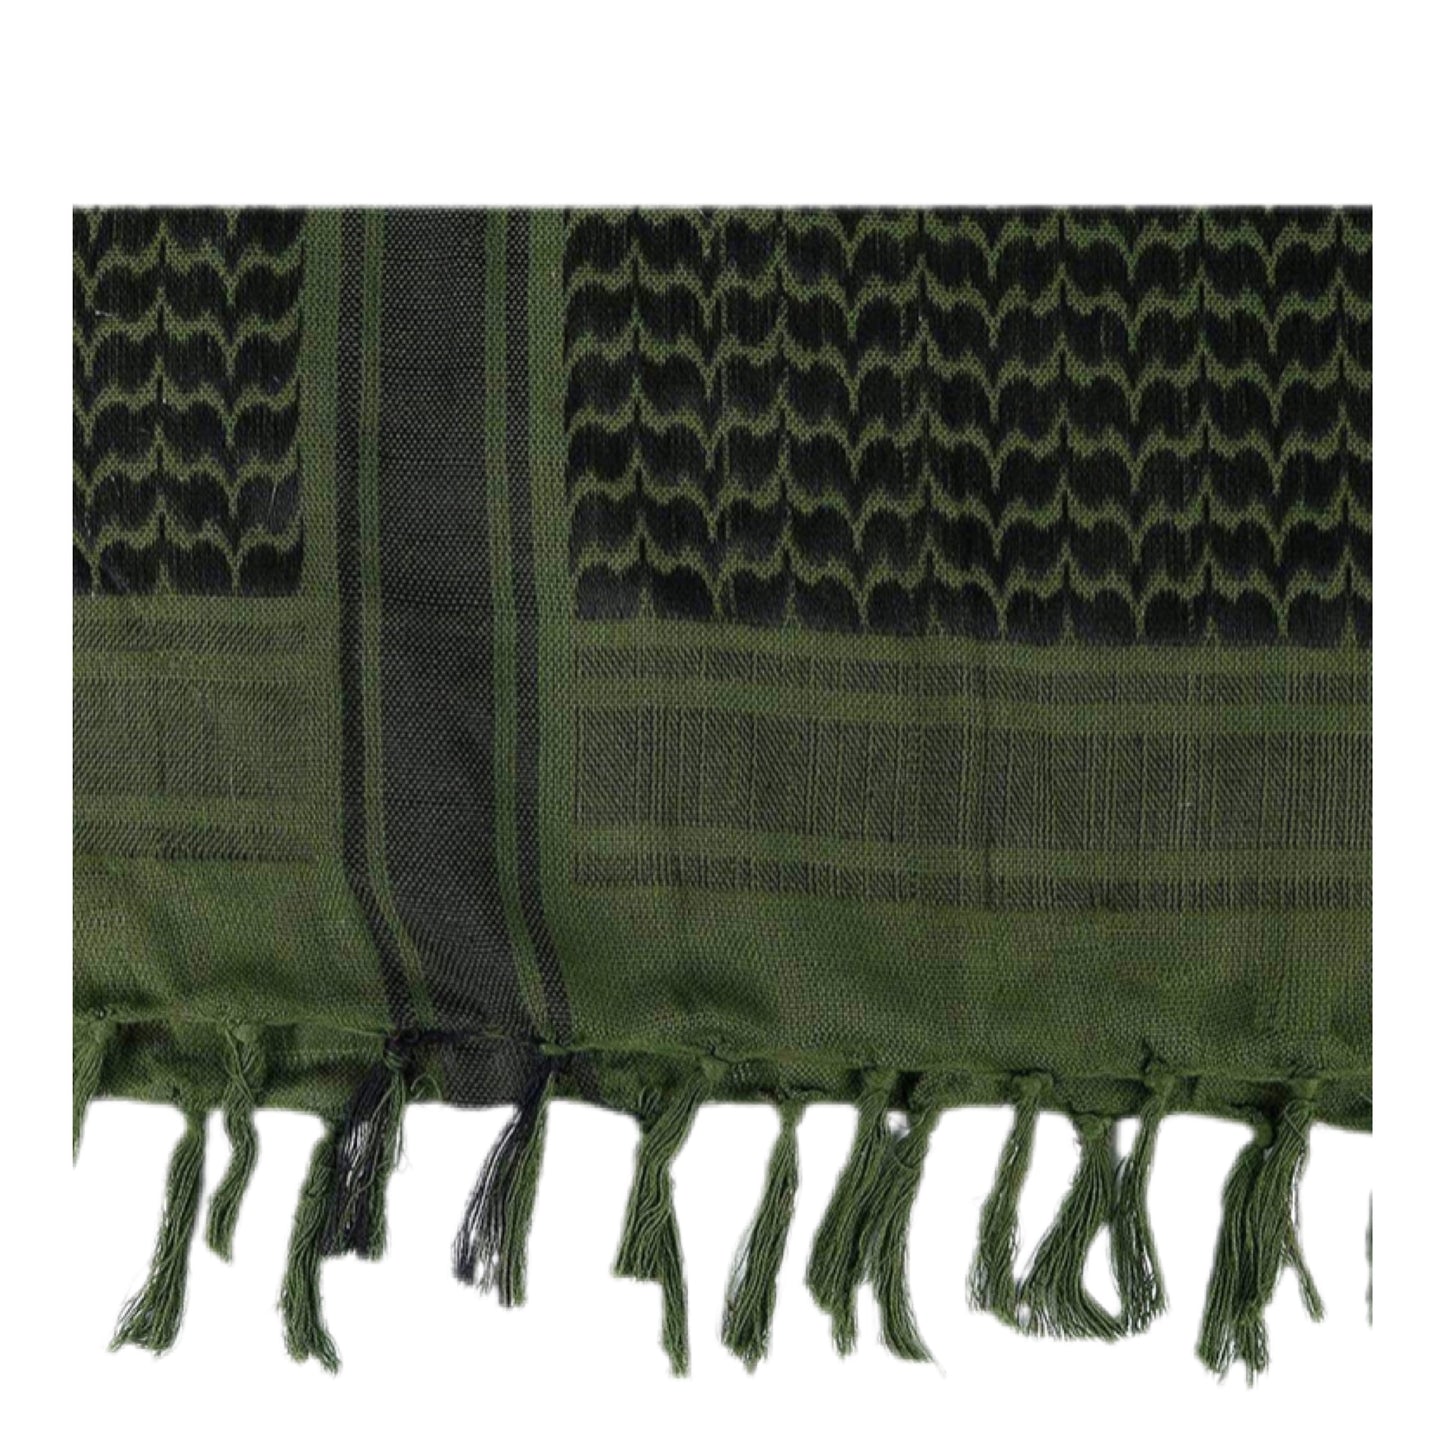 COYOTE SHEMAGH TACTICAL DESERT SCARF